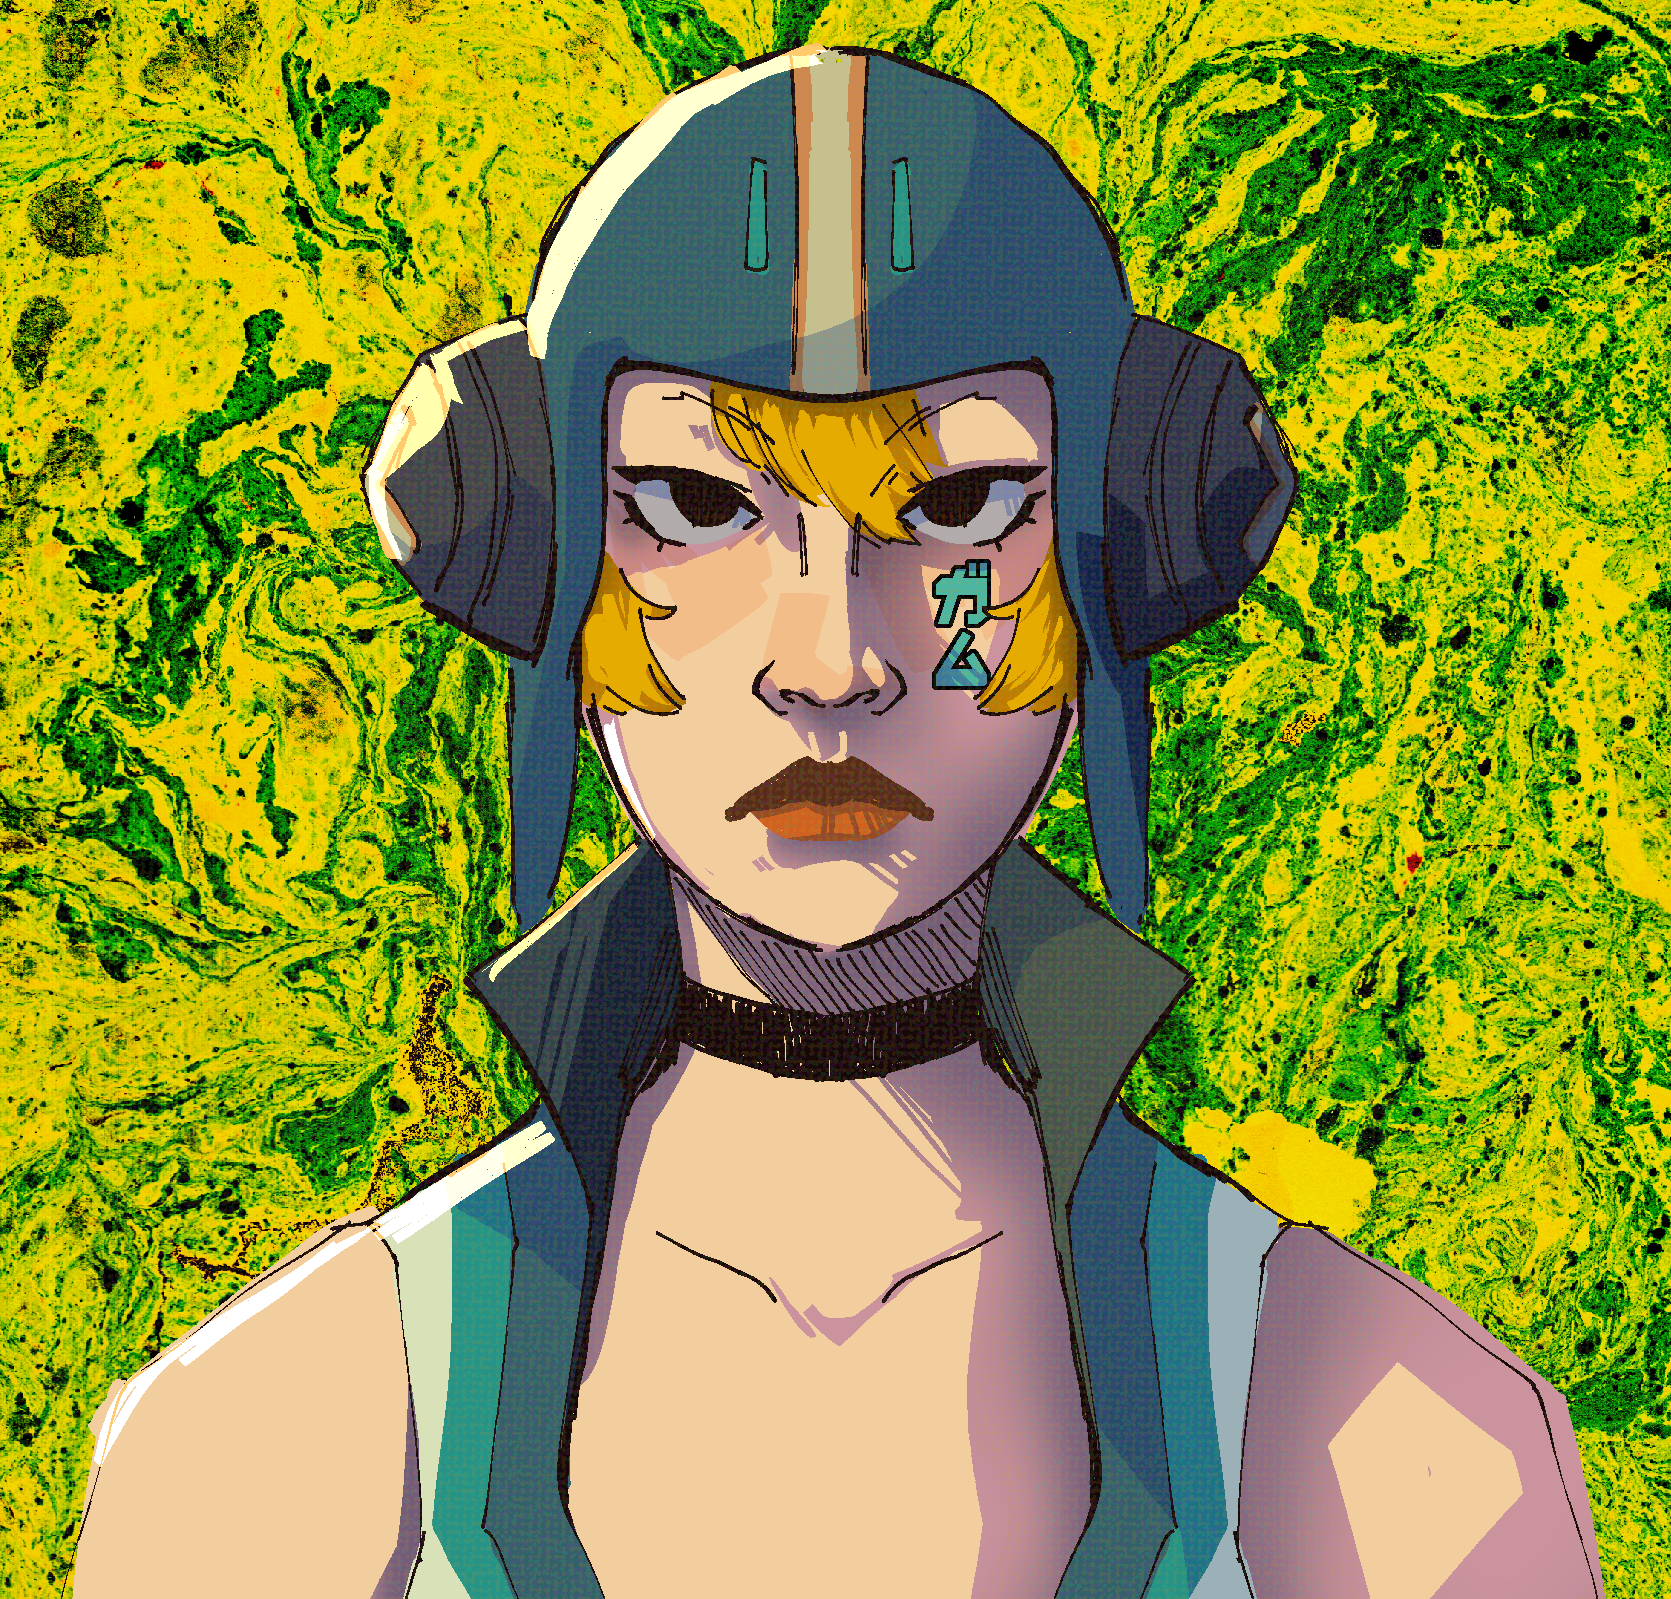 A digital drawing of Gum from Jet Set Radio Future from the shoulders up. She is staring forward at the viewer, determined looking. The shading is a bit blocky and the background is a bright yellow and green marbled texture.